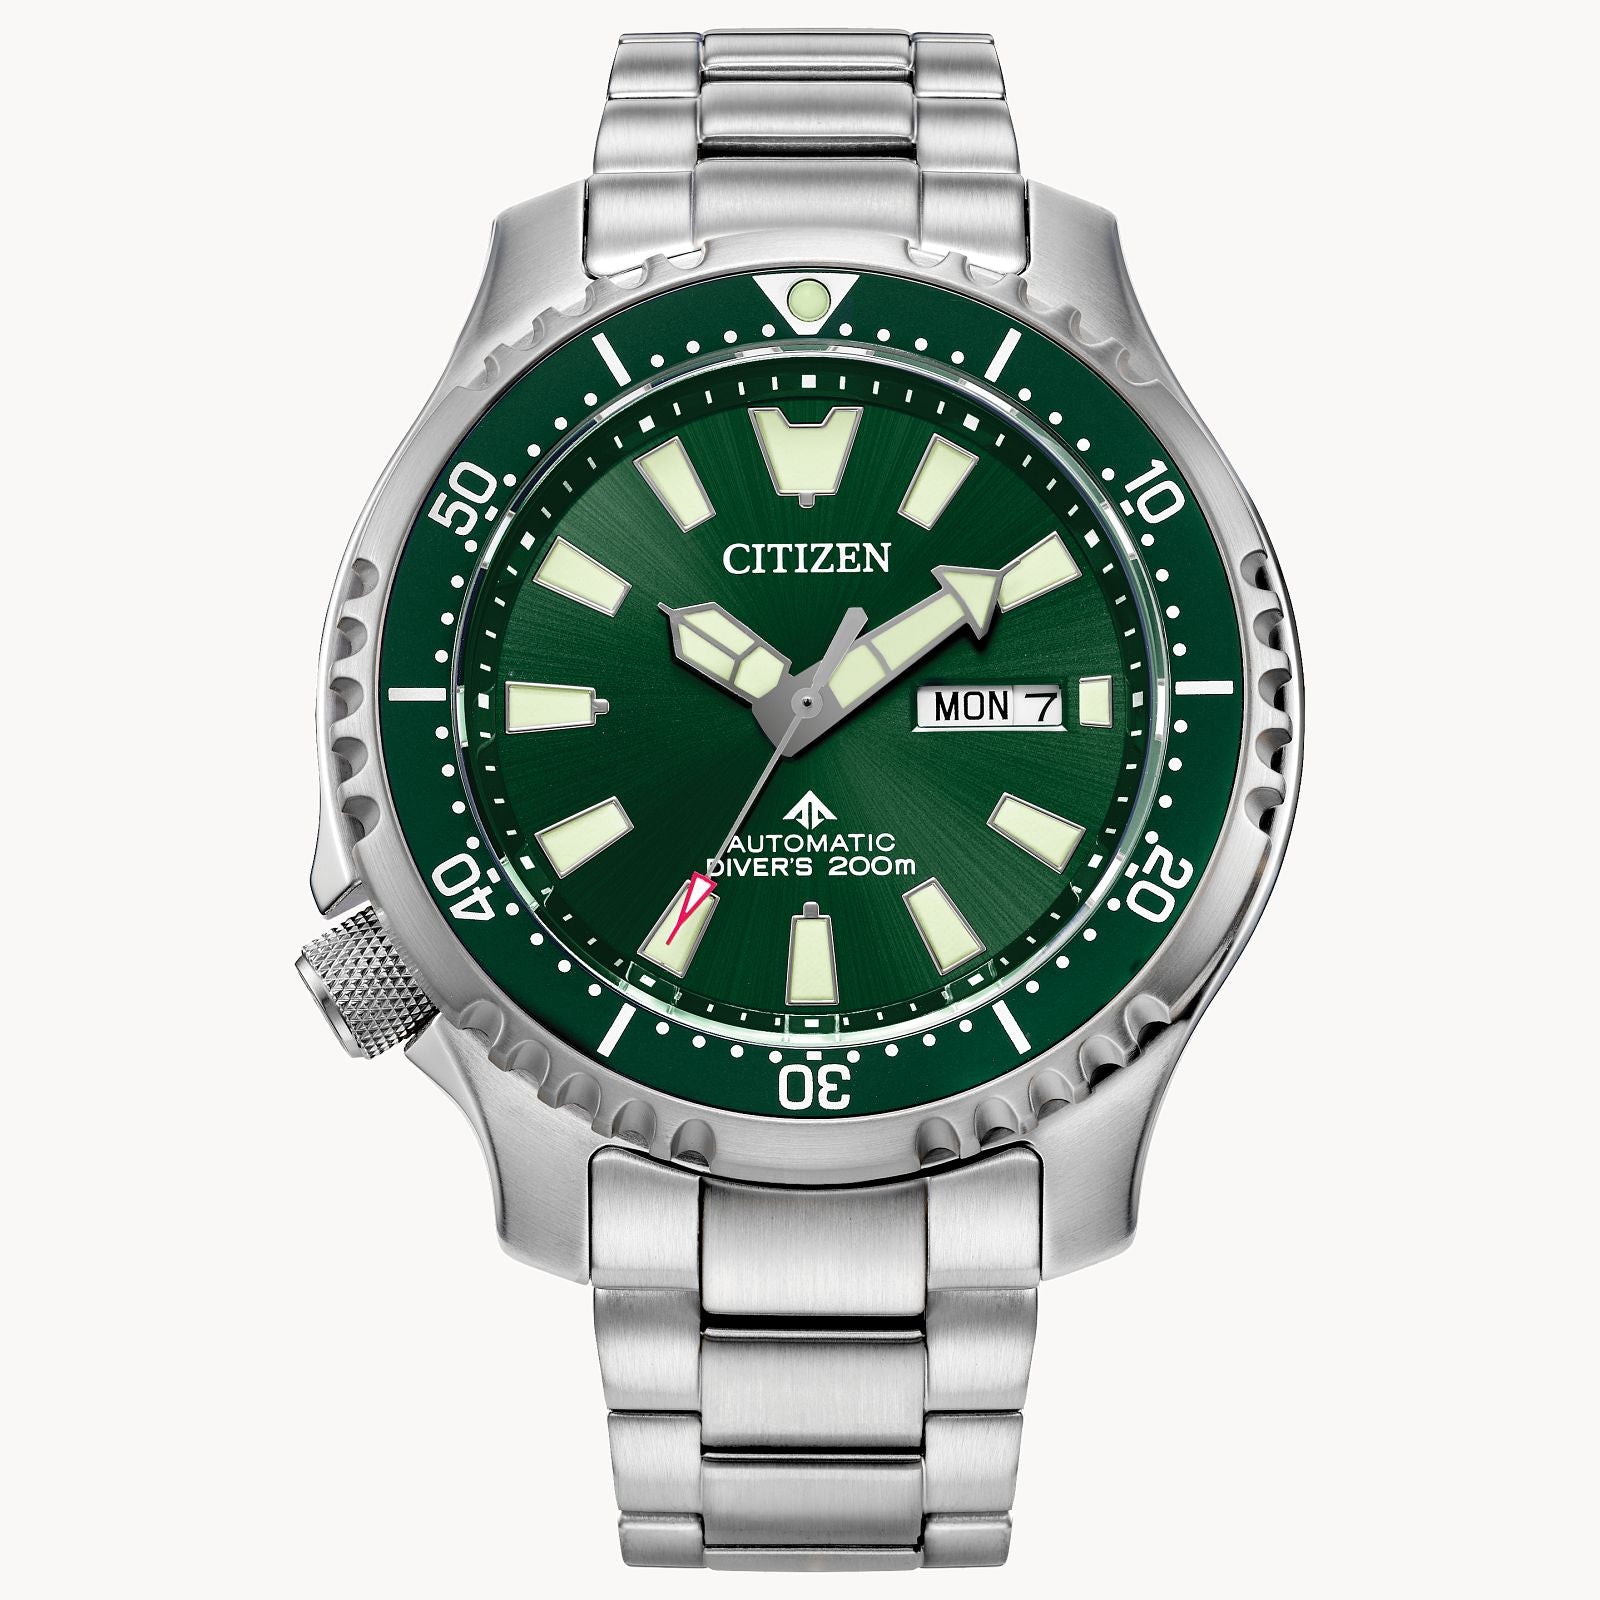 Citizen Promaster Dive Automatic Green Dial Watch